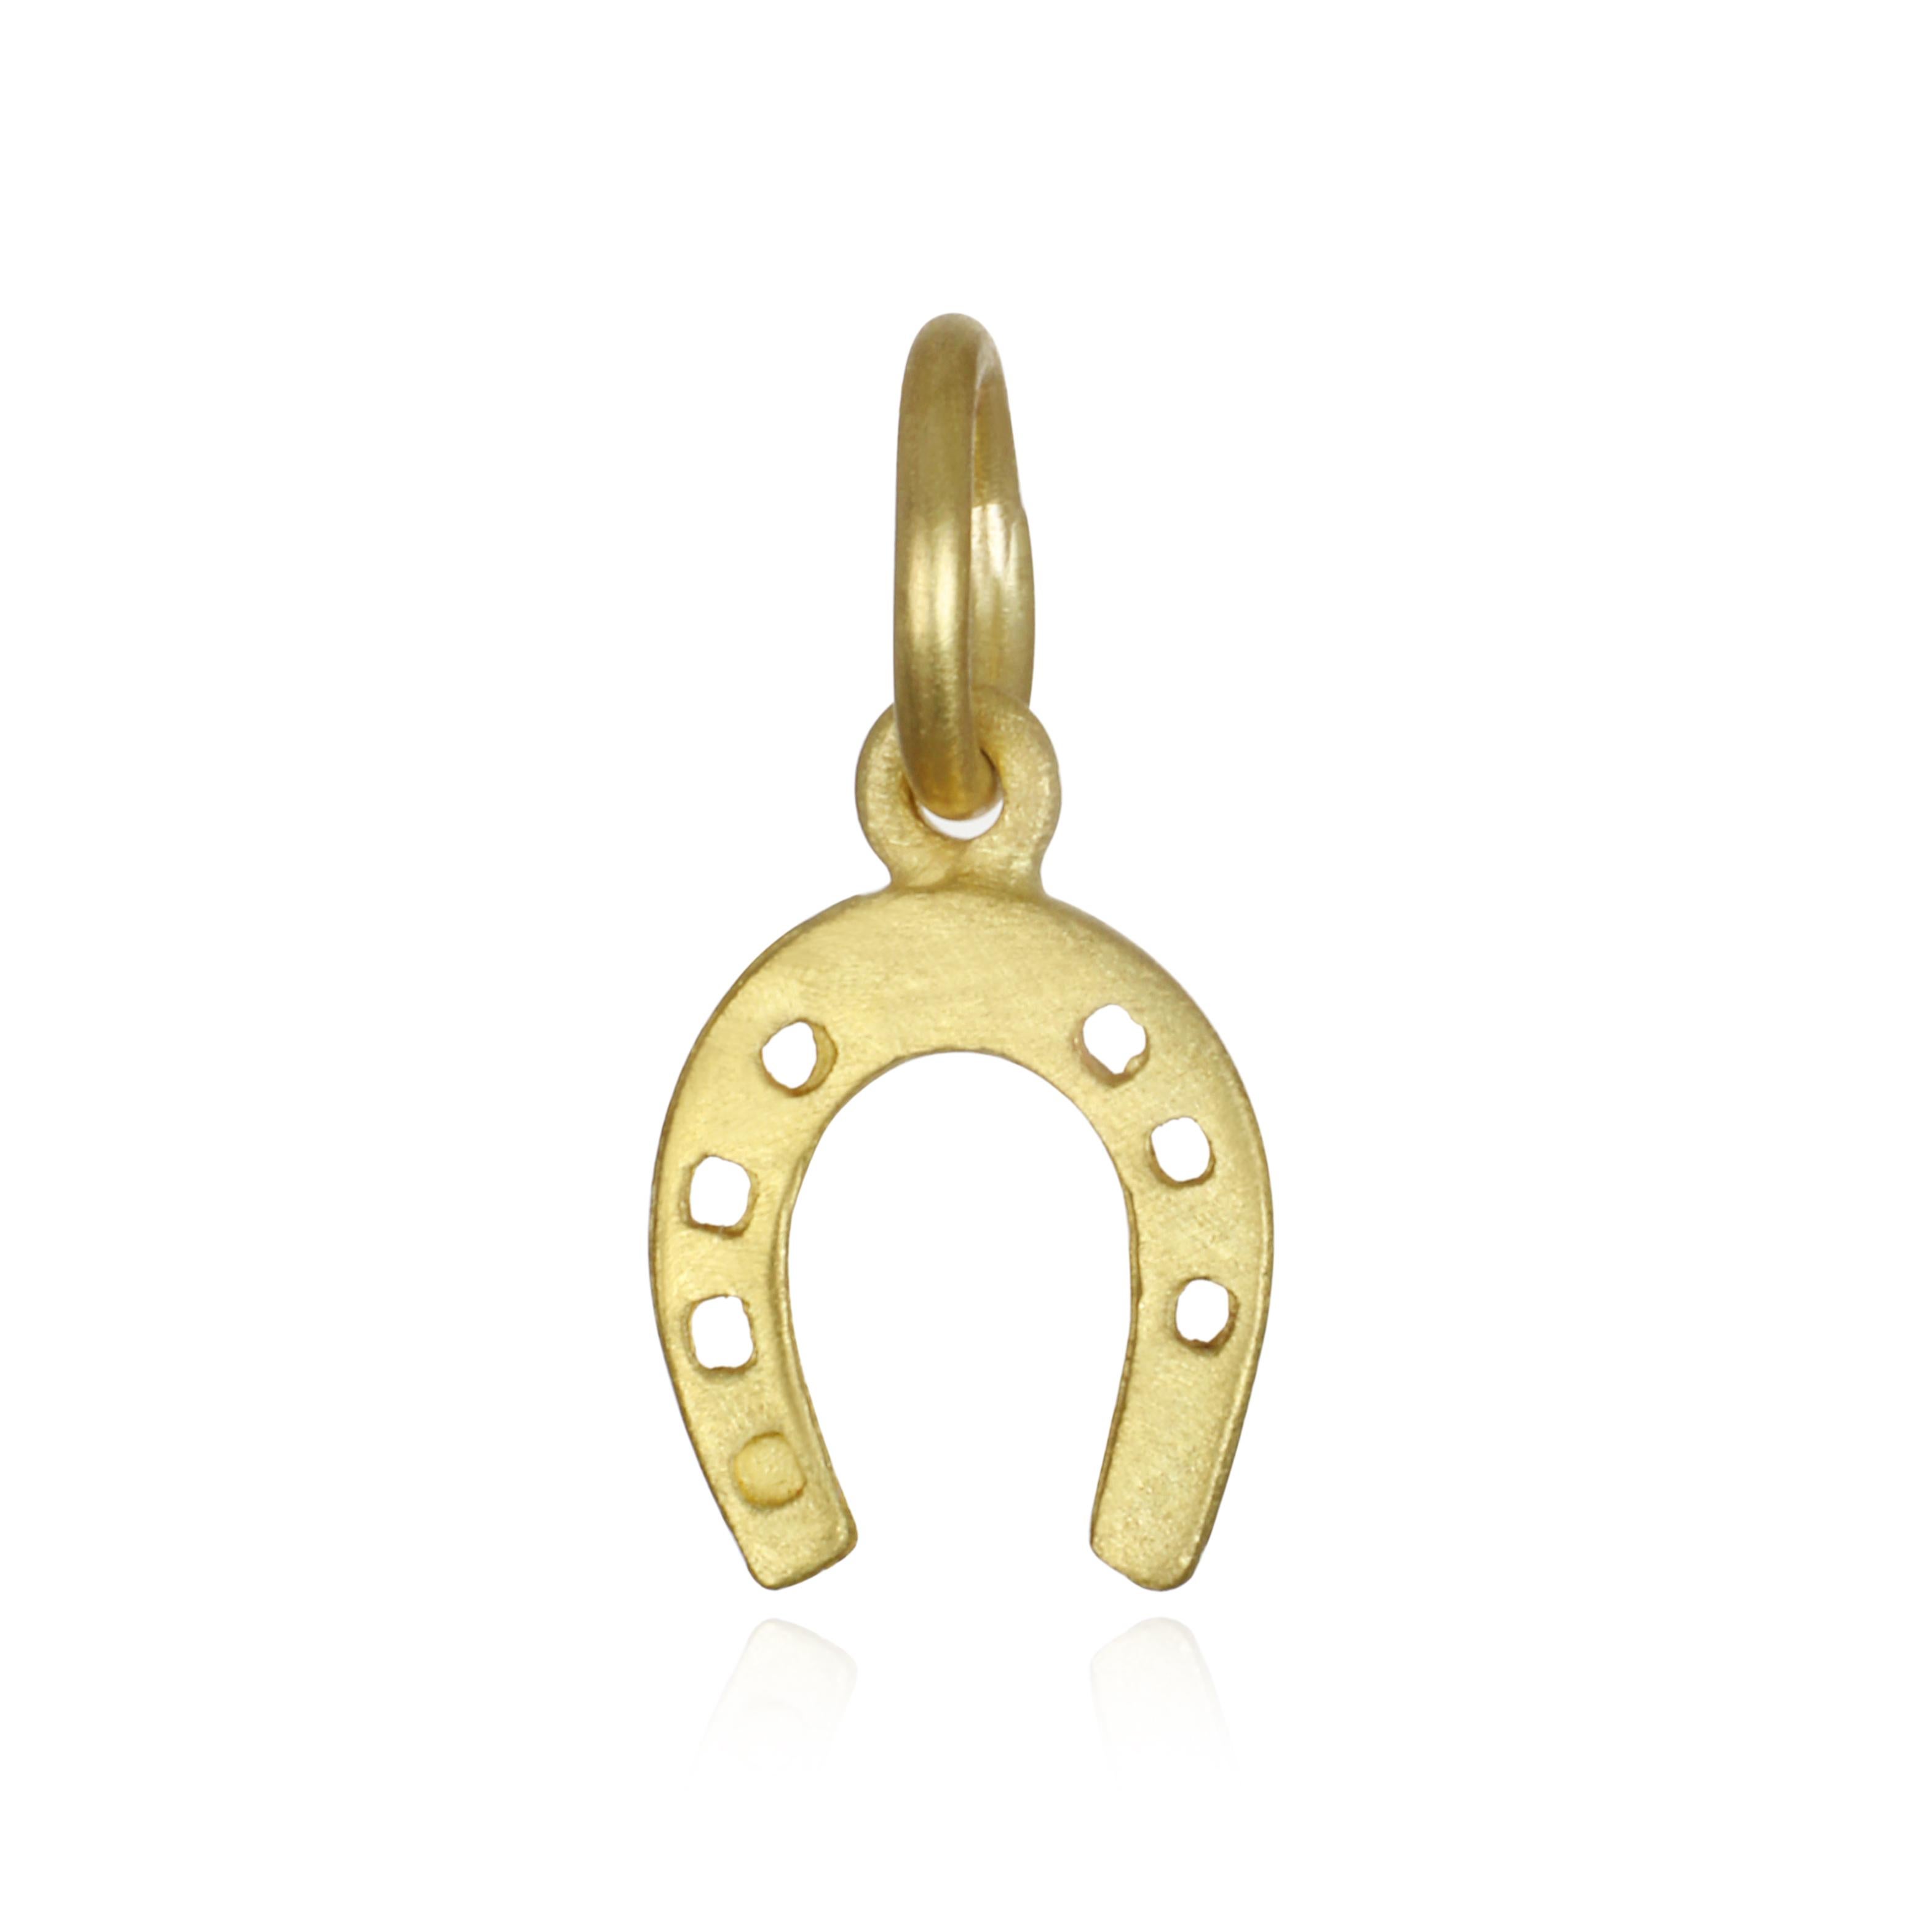 Believed to keep evil spirits out and bring good fortune in, the mini horseshoe charm is a symbol of good luck and protection. 
Charm Length: 10mm 
Chain: 16